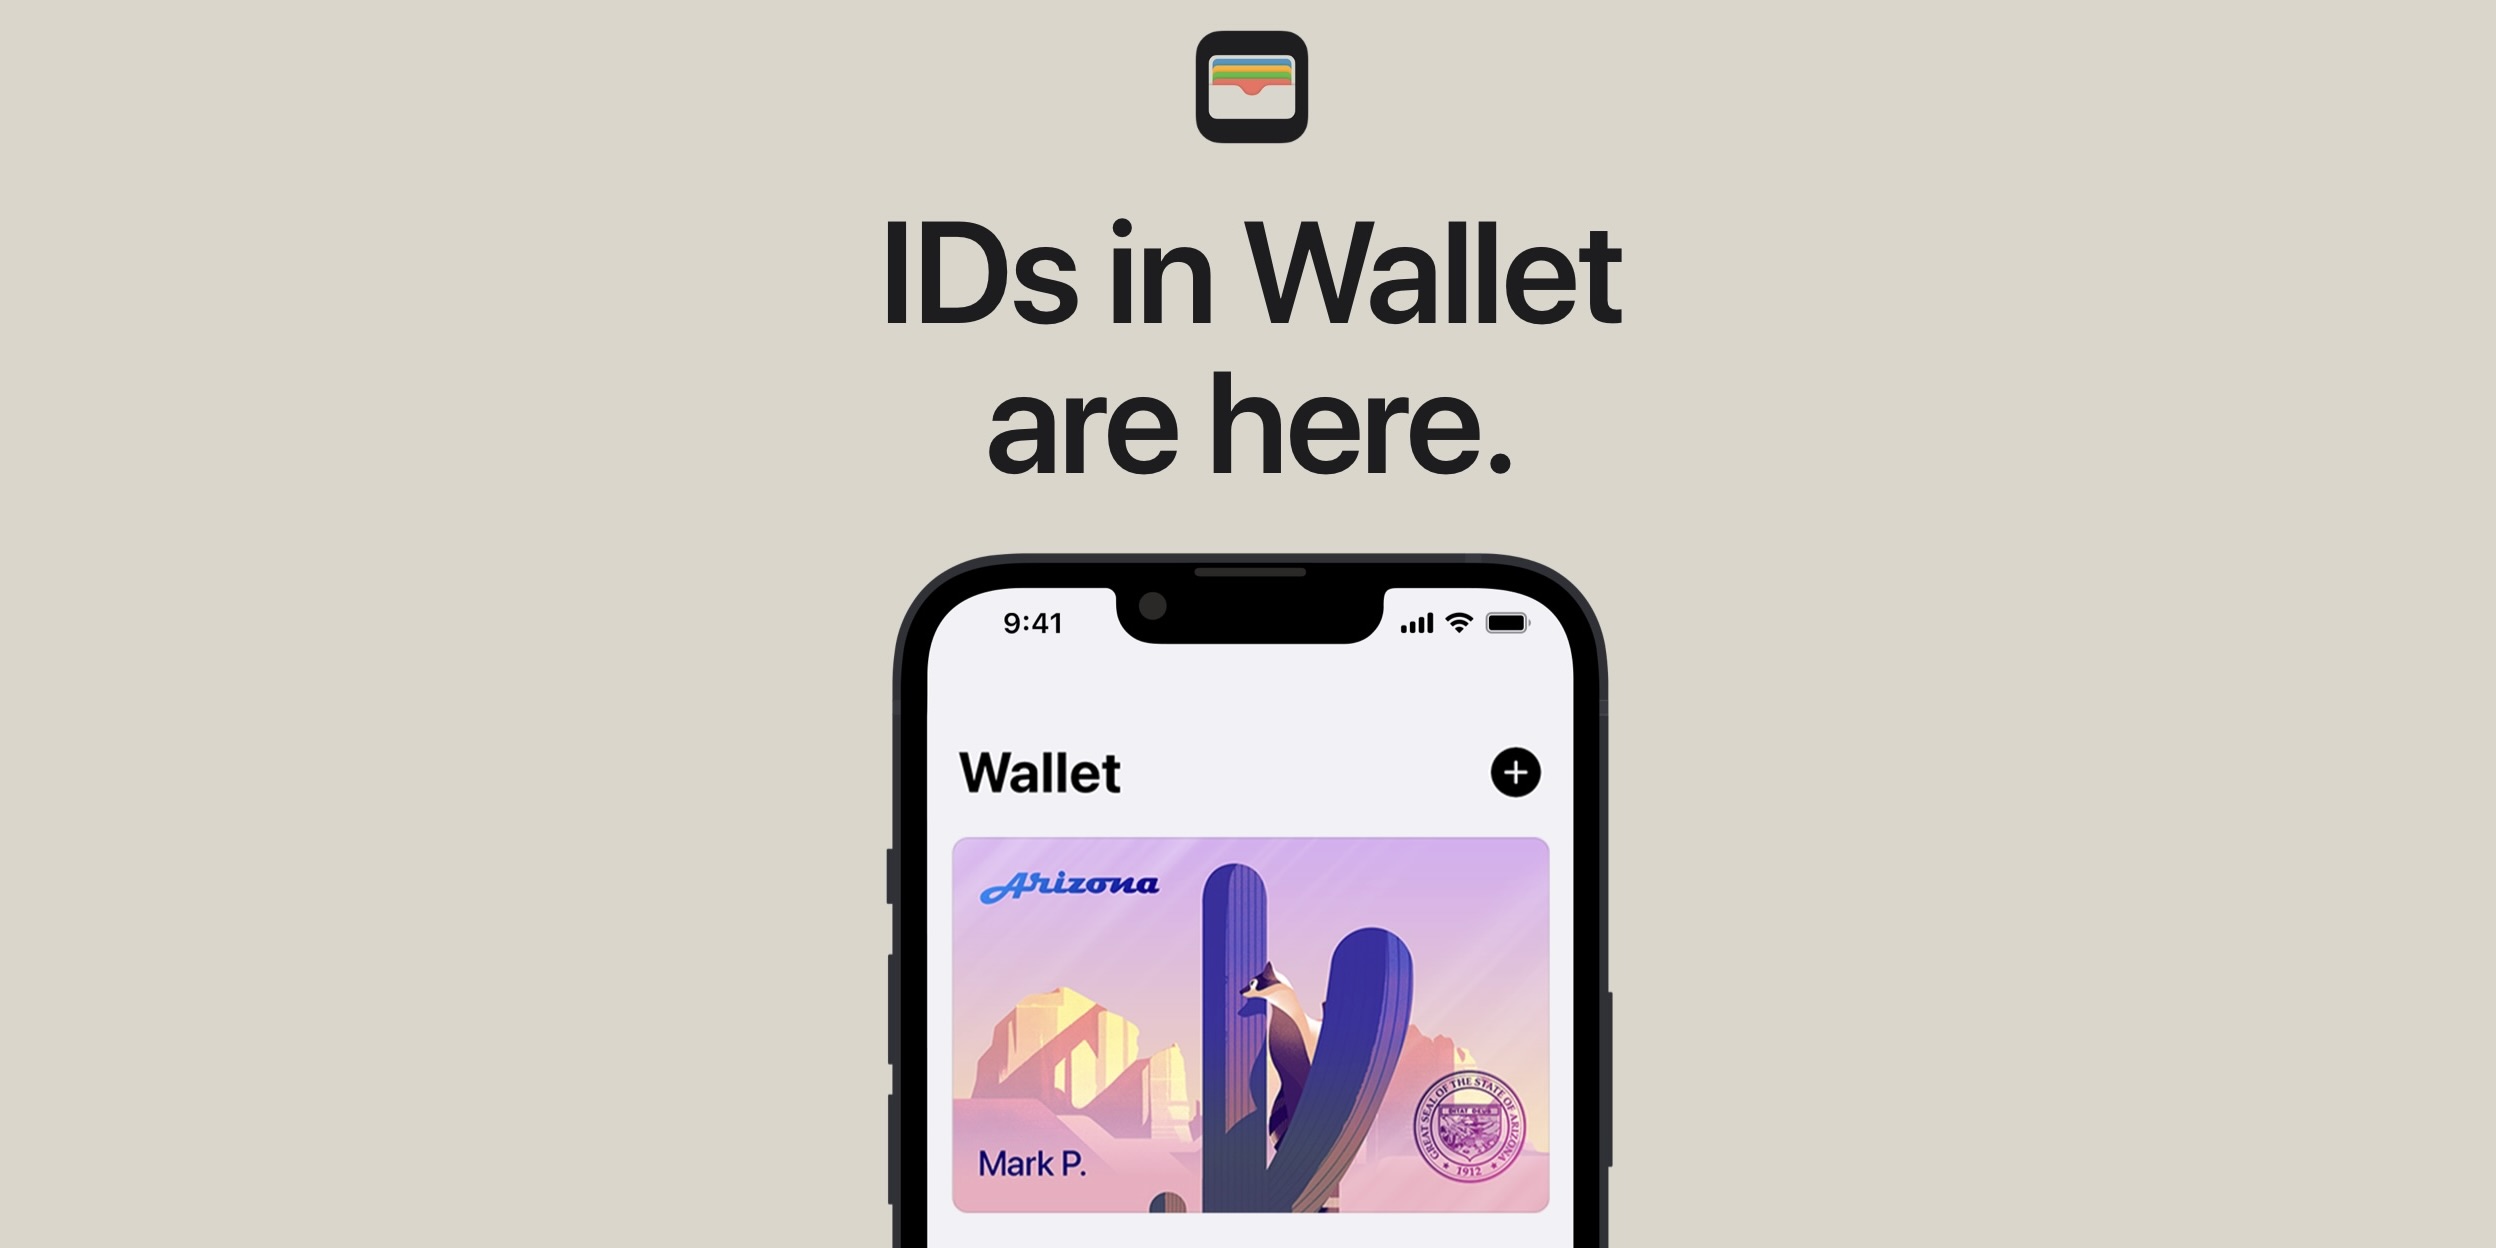 Apple Wallet Digital IDs now available